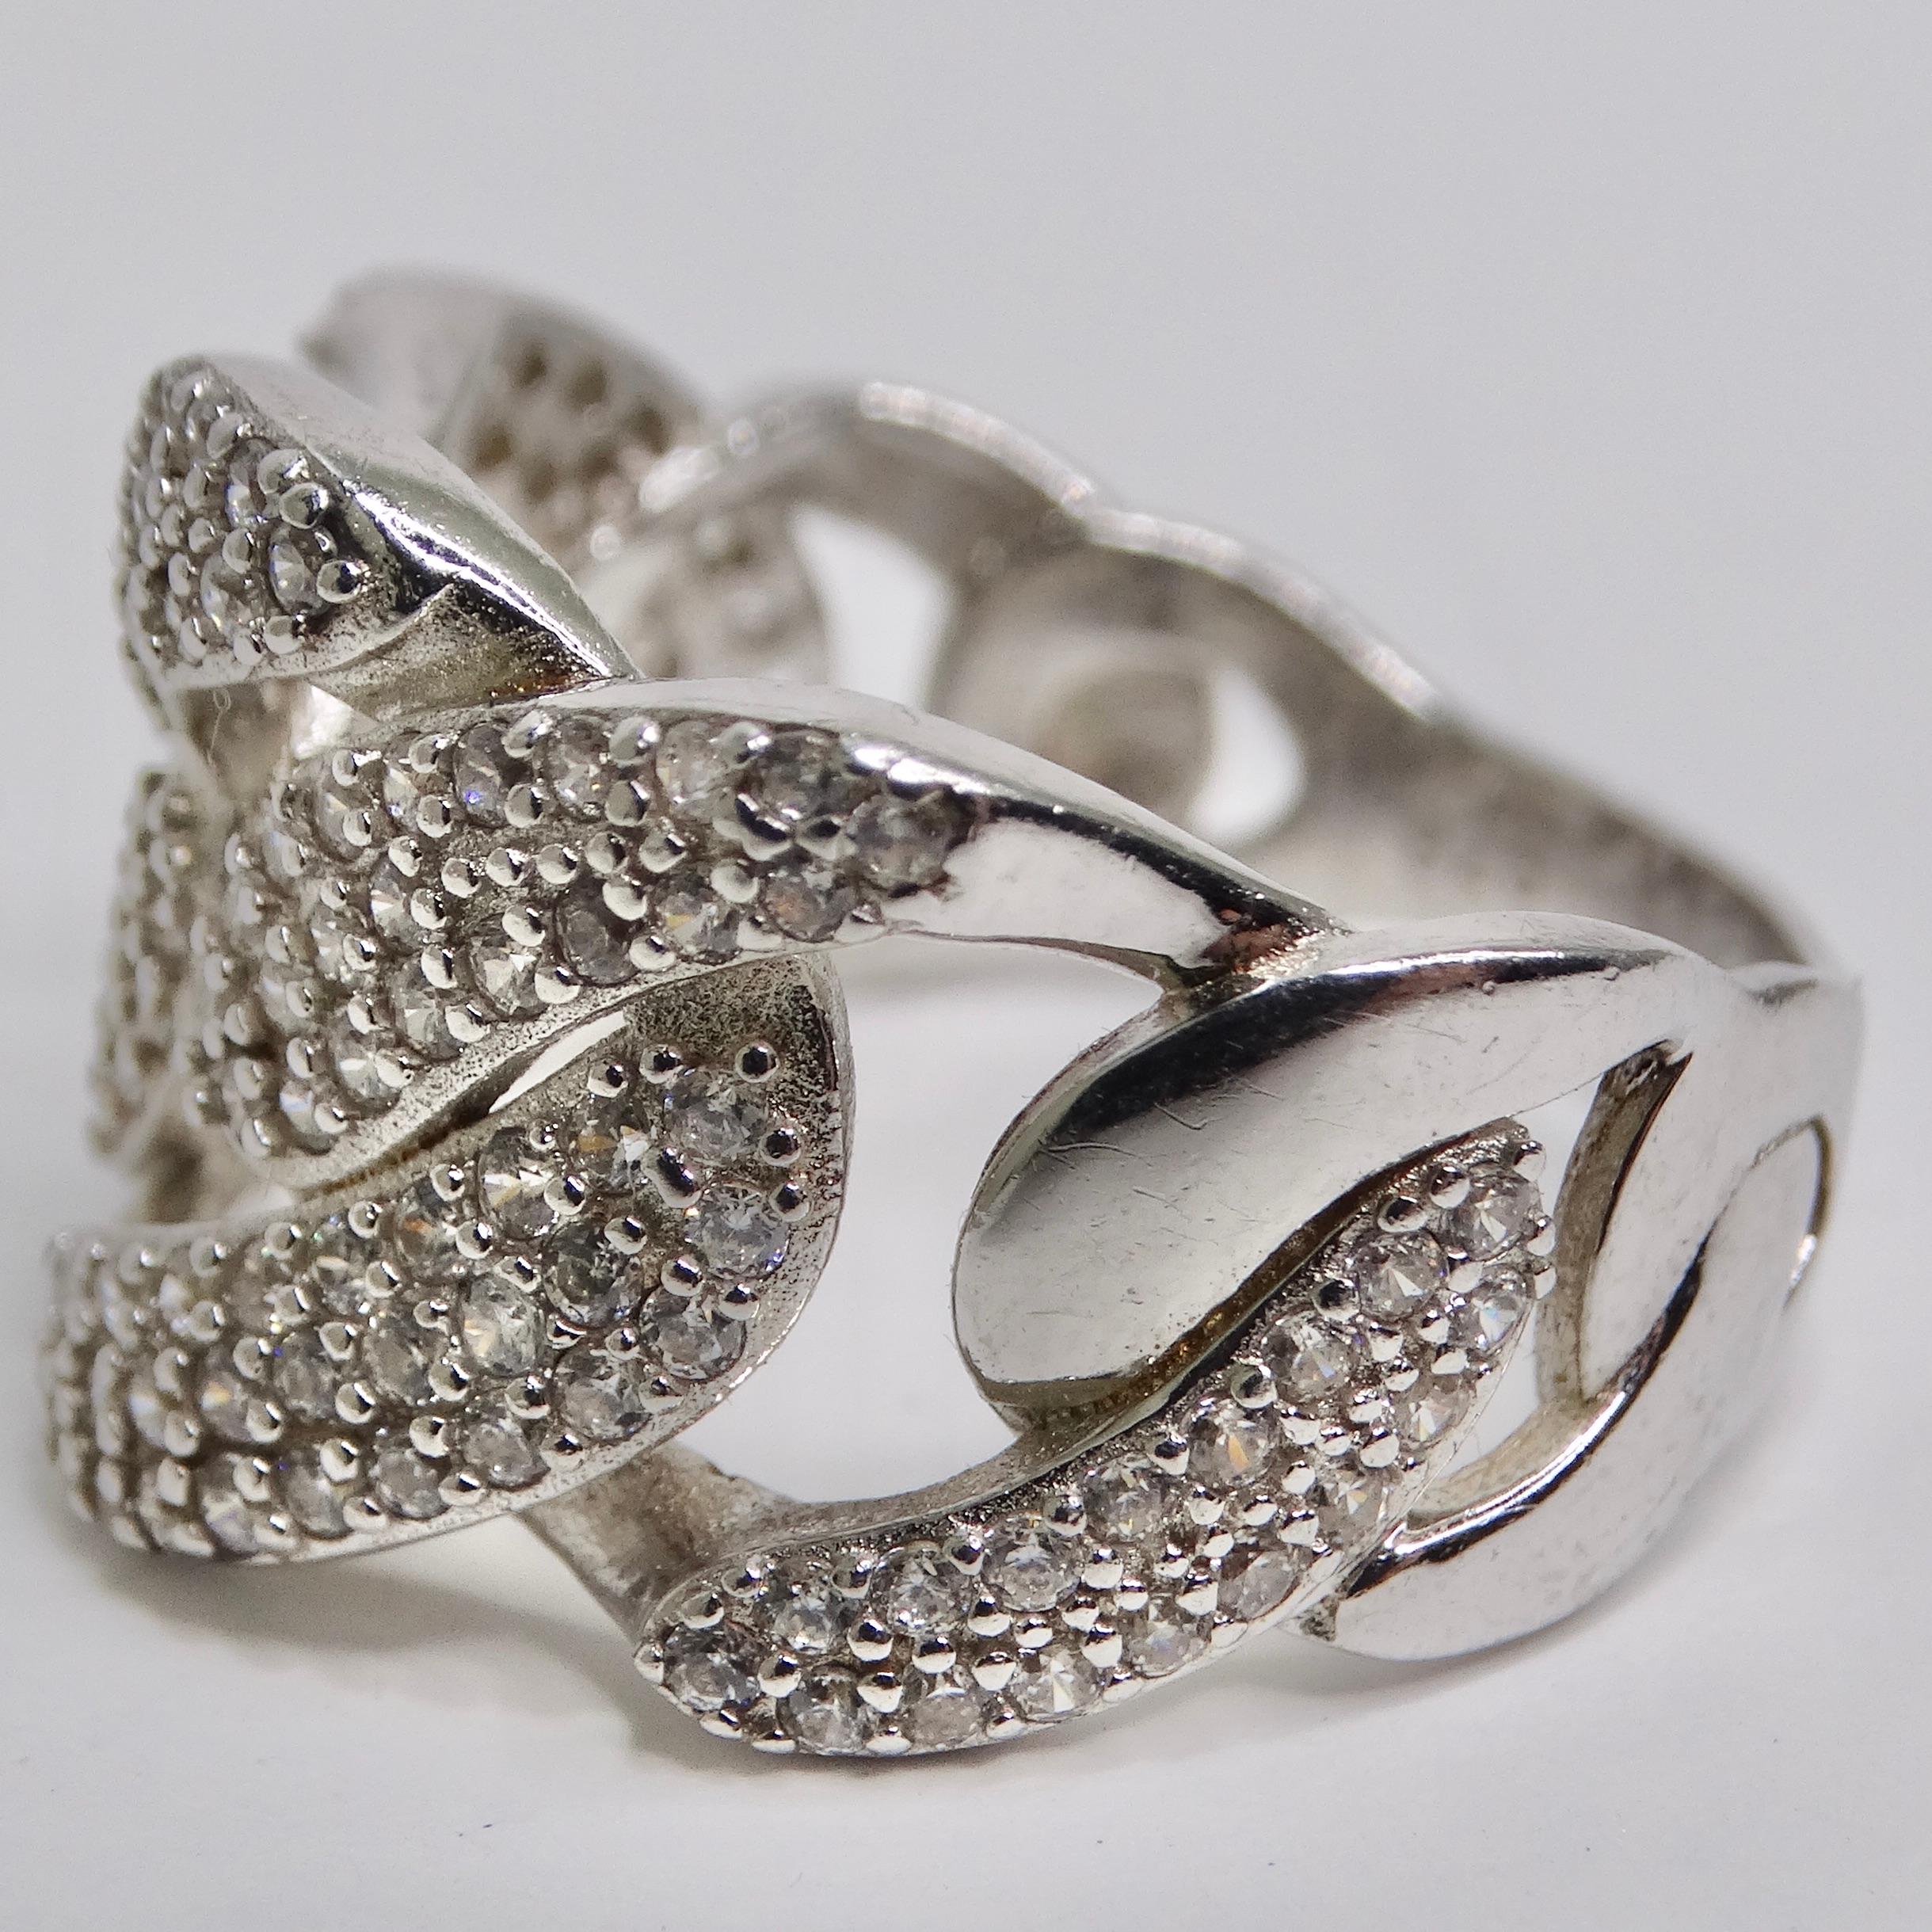 Silver Swarovski Crystal Chain Motif Ring In Excellent Condition For Sale In Scottsdale, AZ